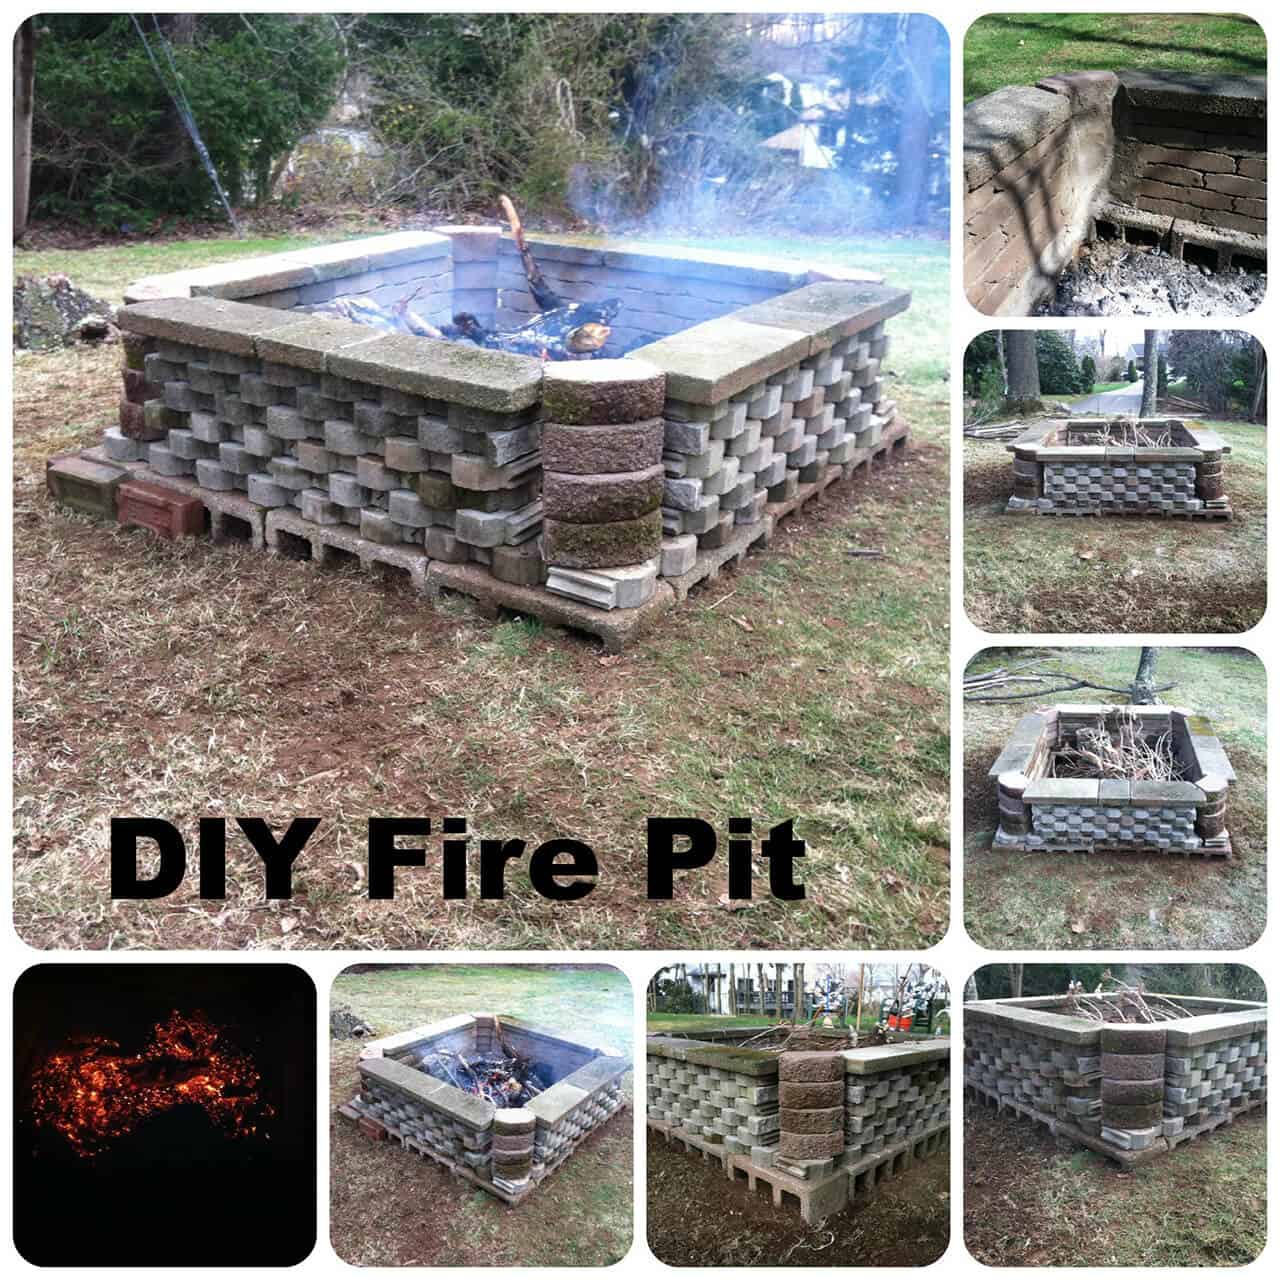 Giant cinder block and stone fire pit